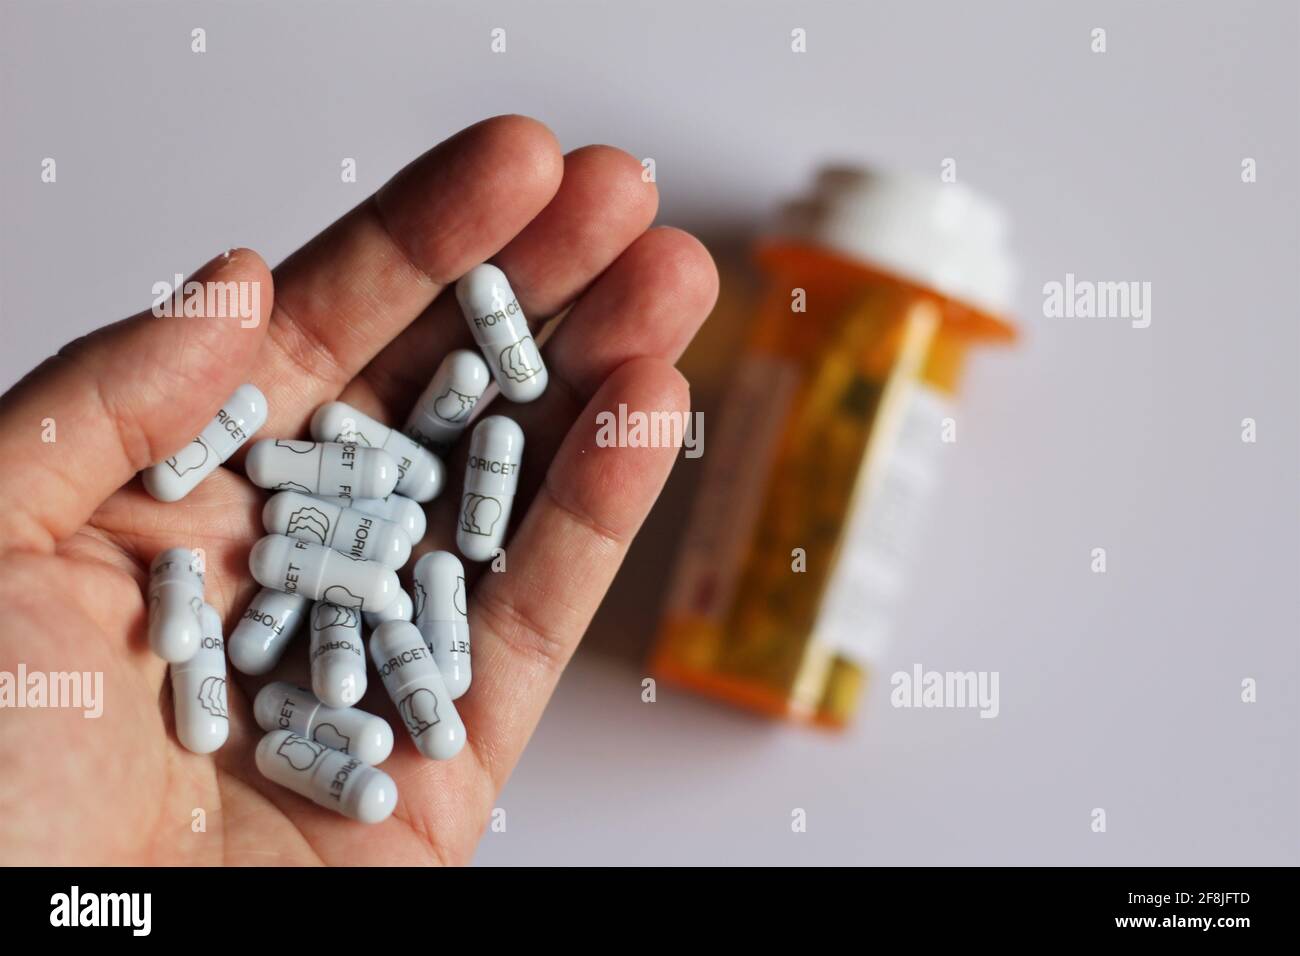 Hand with Fioricet pills. Generic names Butalbital Acetaminophen Medication used to treat tension headaches with caffeine acetaminophen and Butalbital Stock Photo